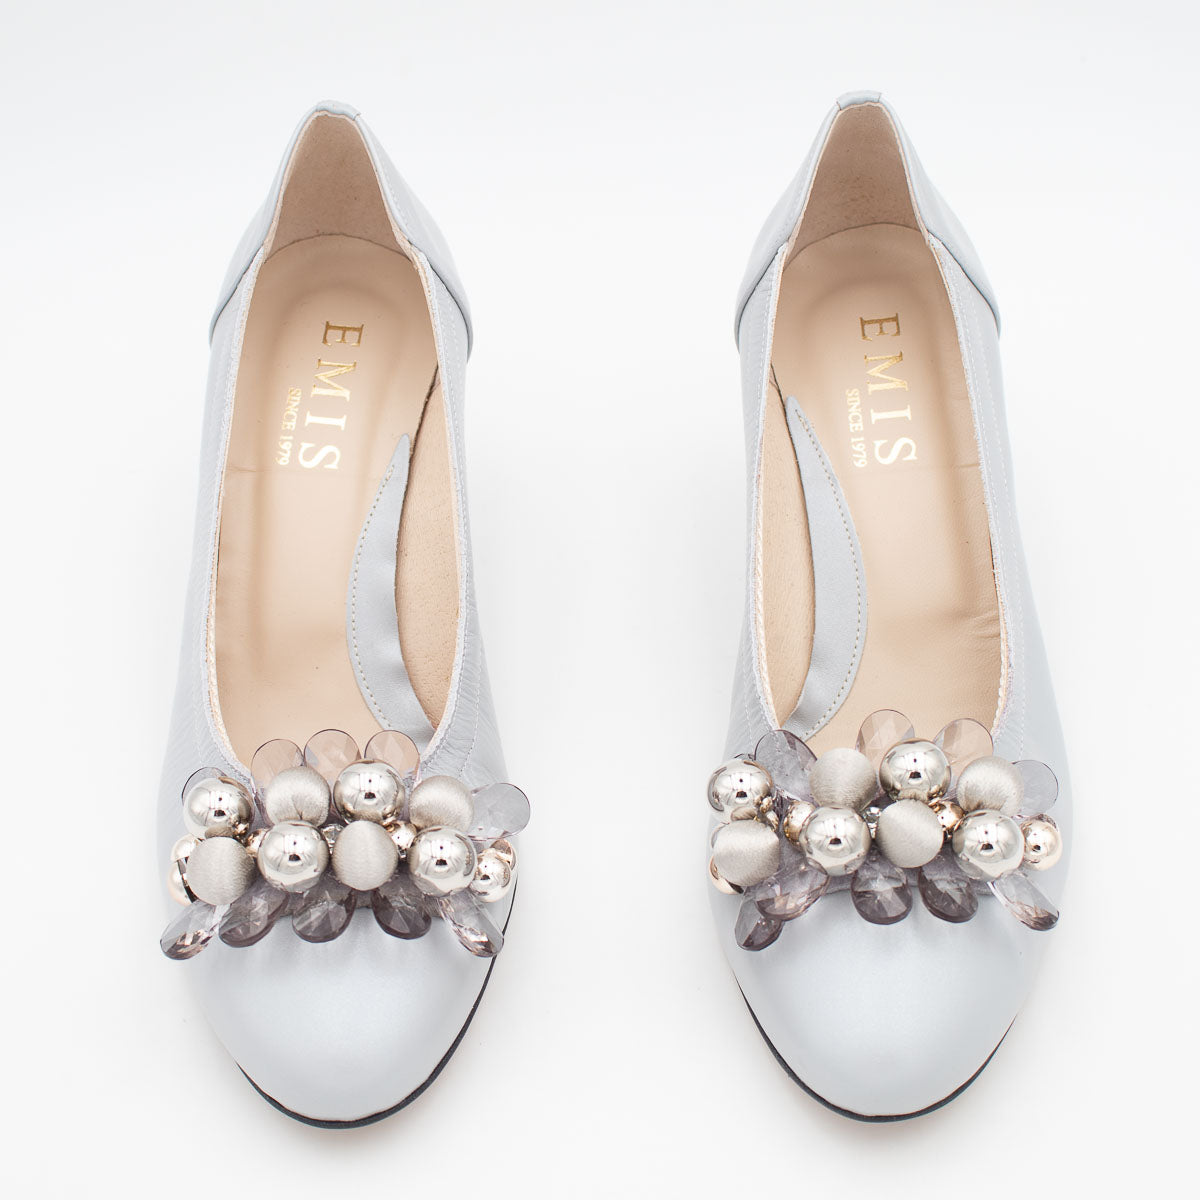 Classic Grey Heels with Glamorous Pearl Accents